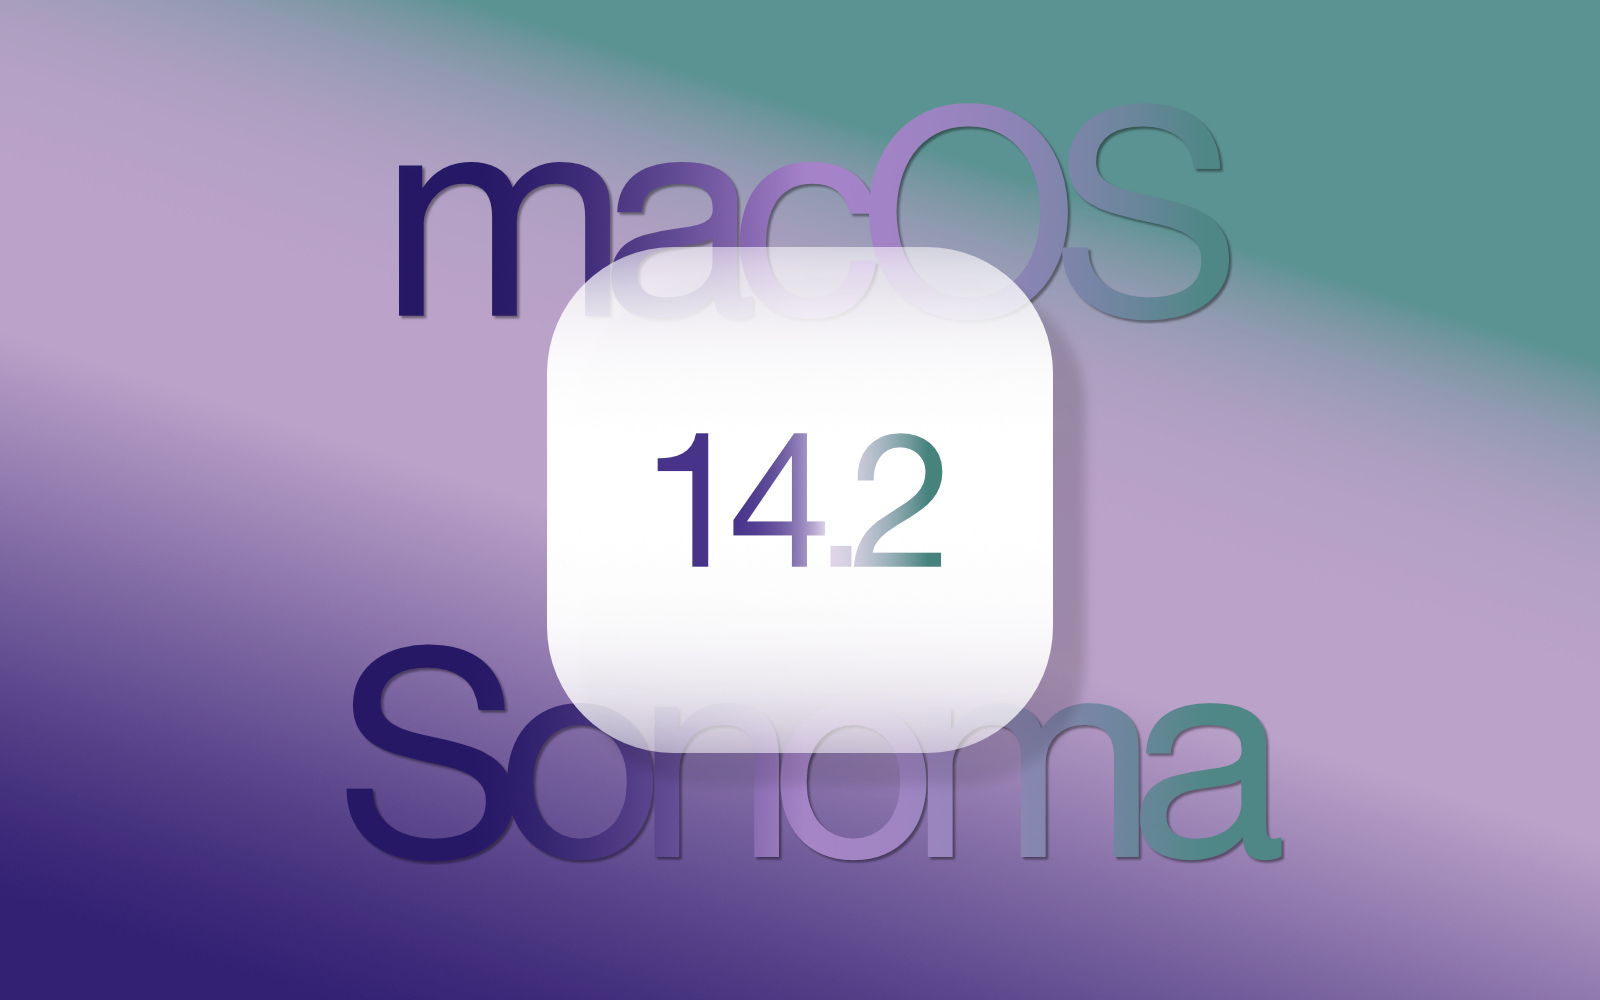 Macos Sonoma 14 2 official release